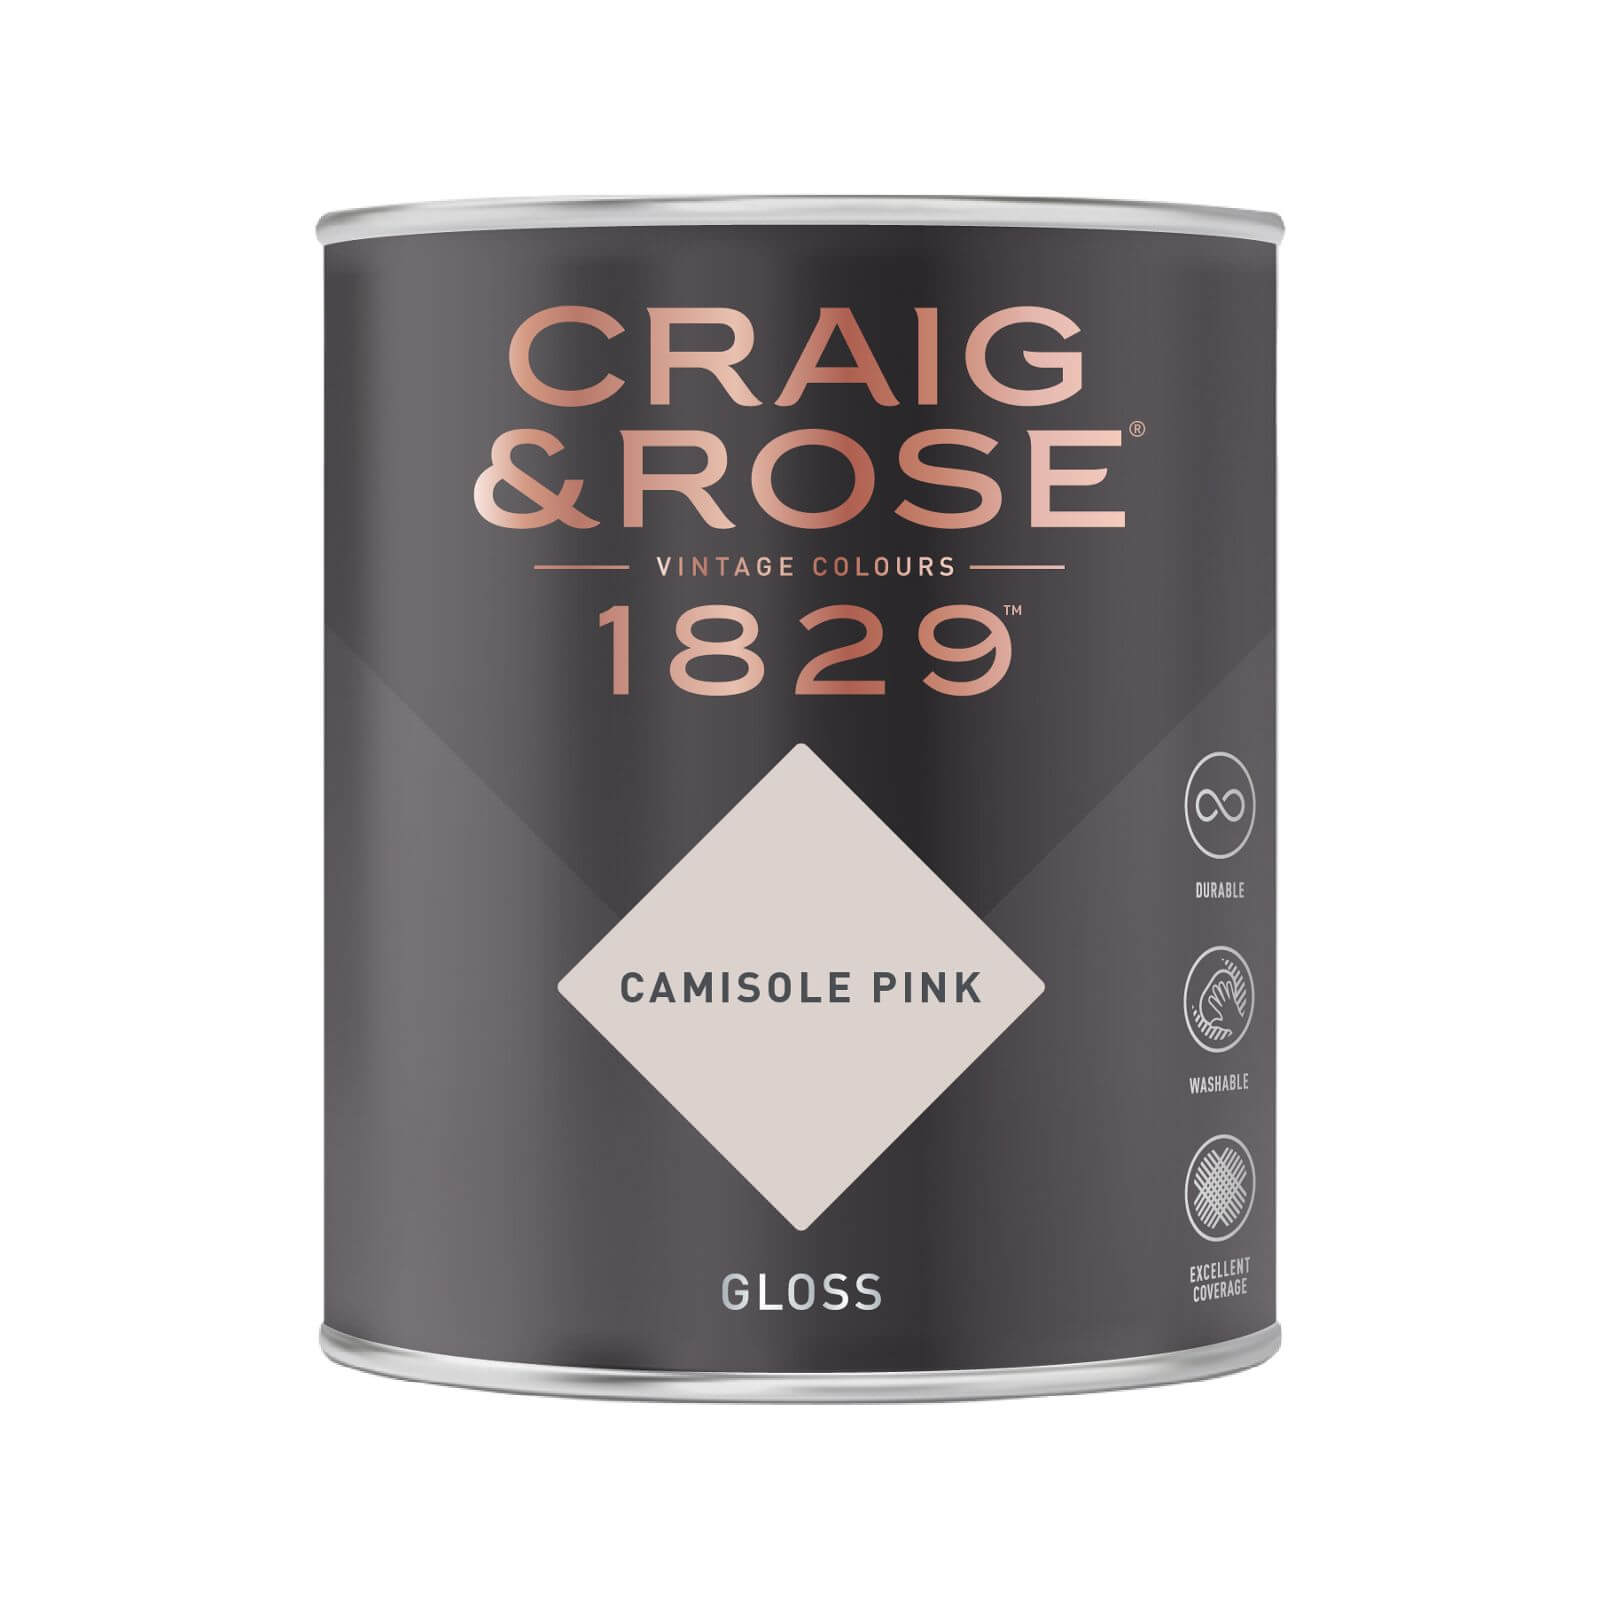 Craig & Rose 1829 Gloss Paint Camisole Pink - 750ml